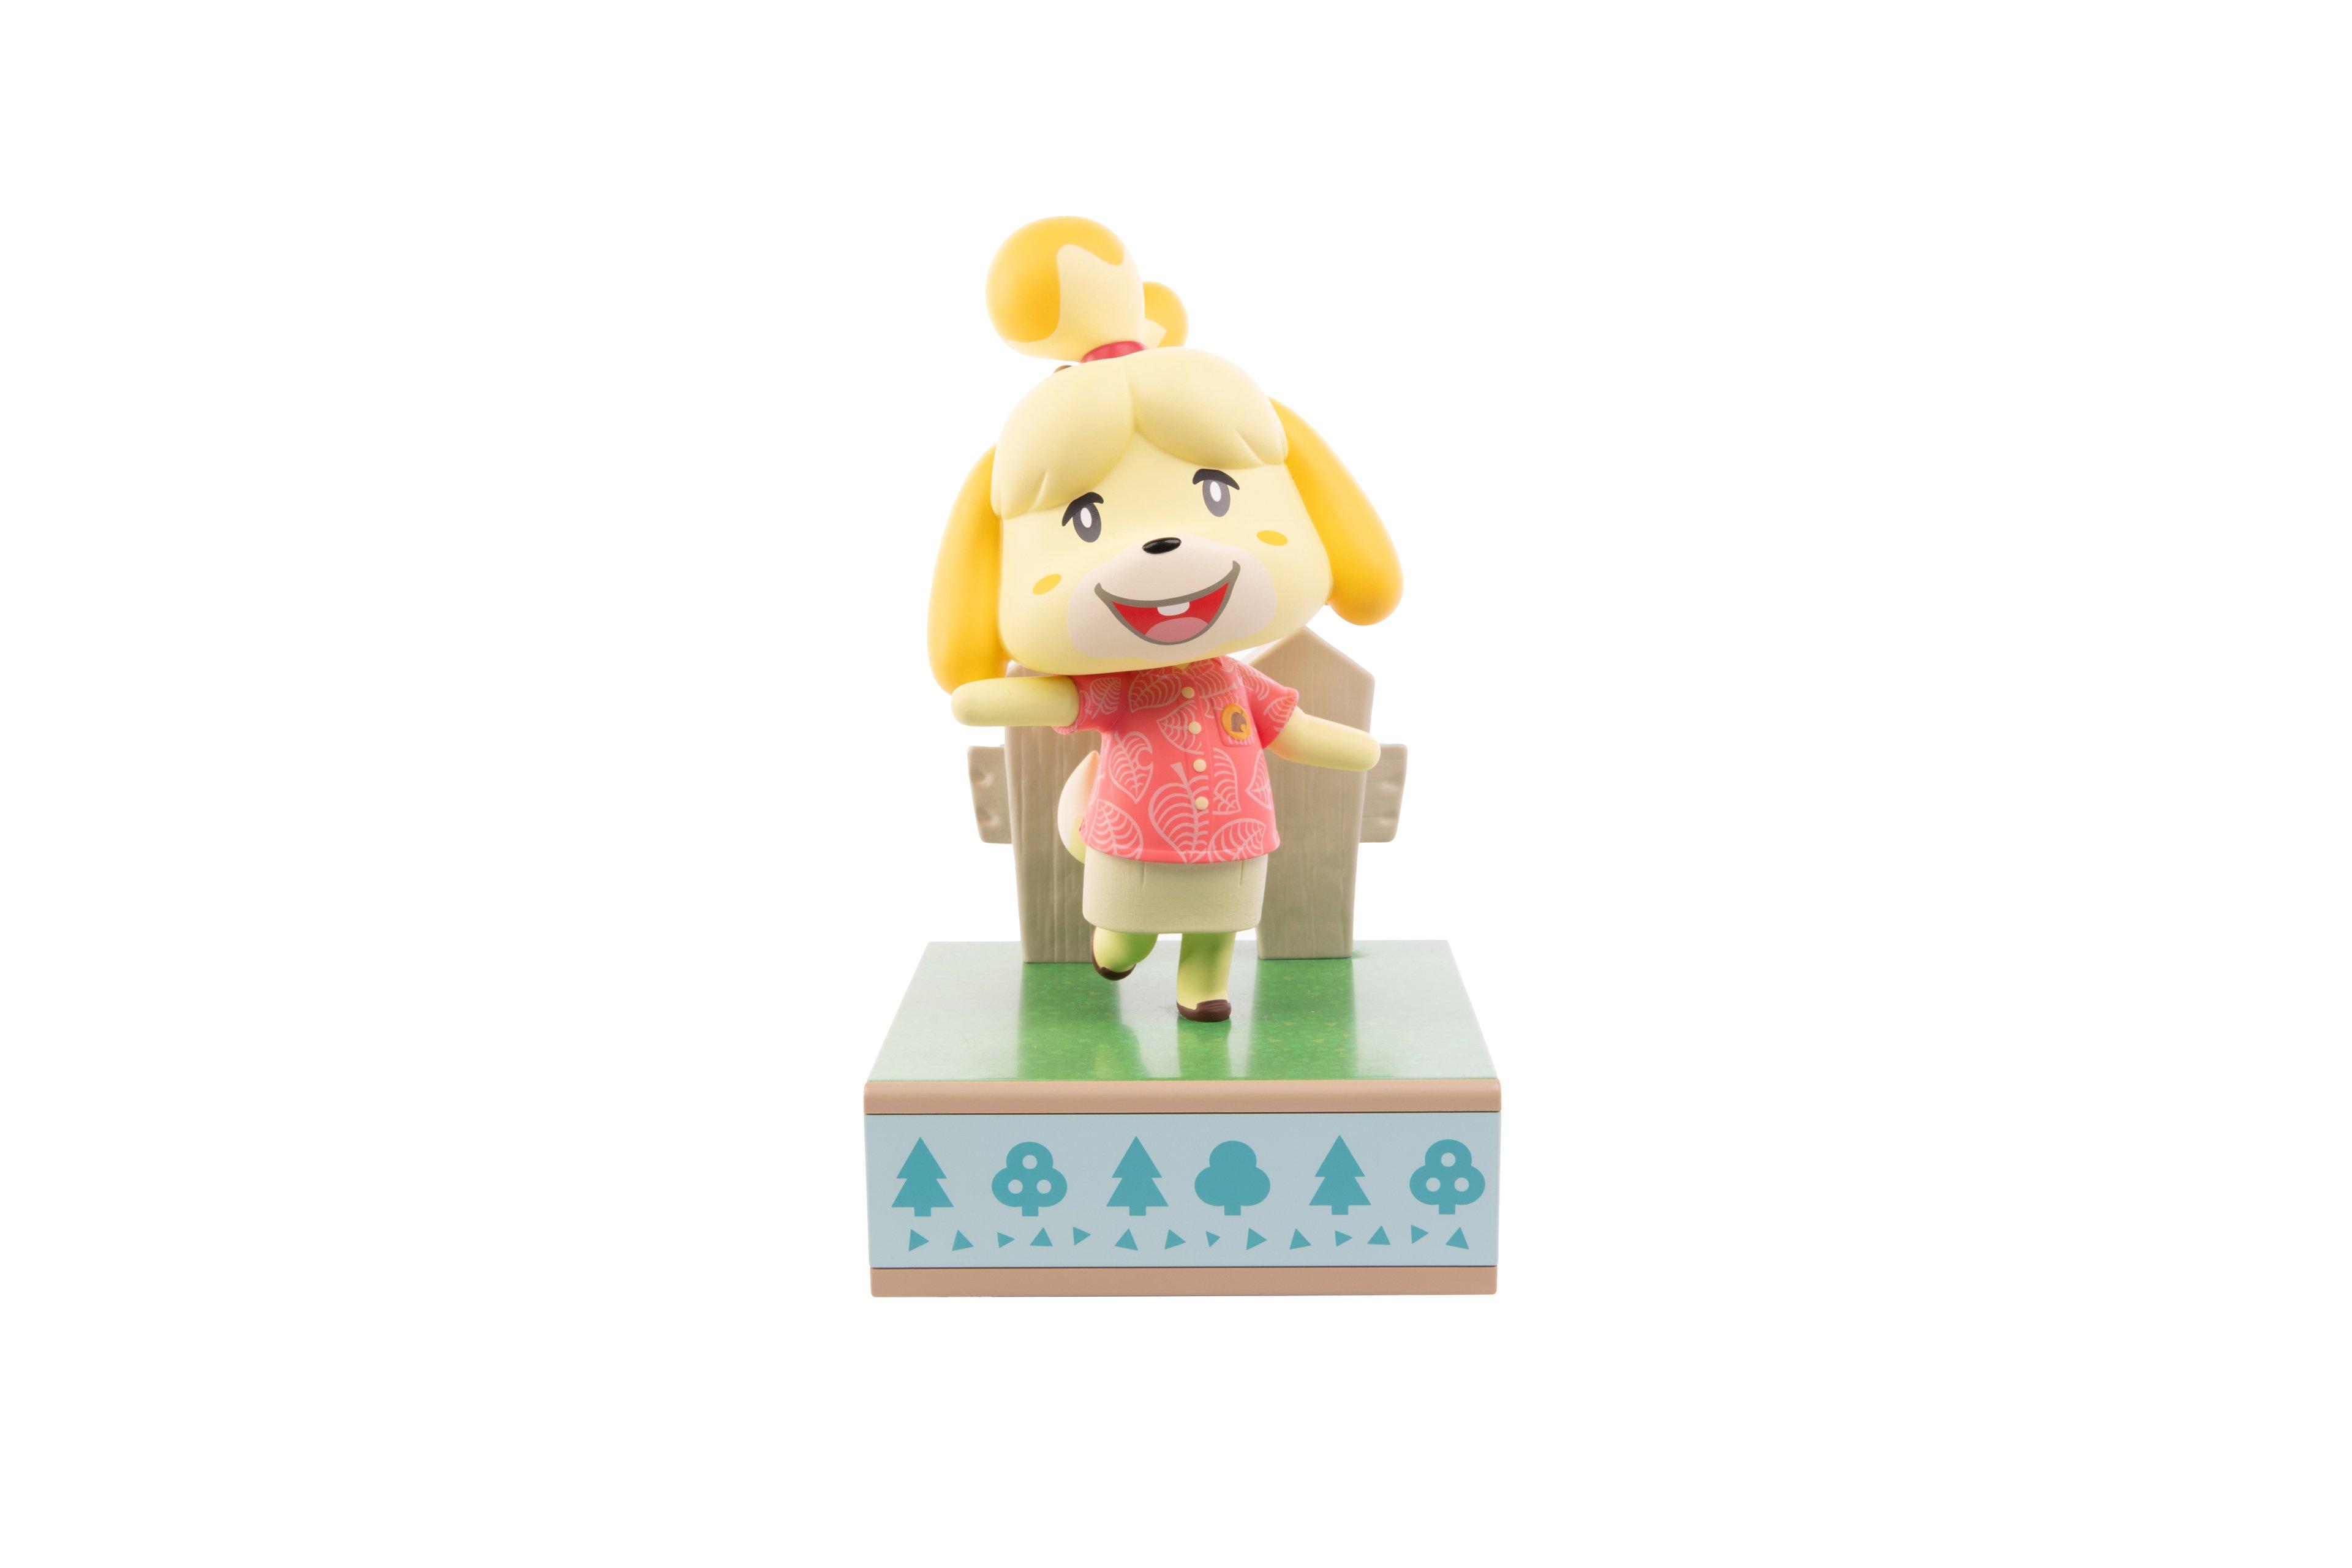 Animal Crossing: New Horizons - Isabelle Figure